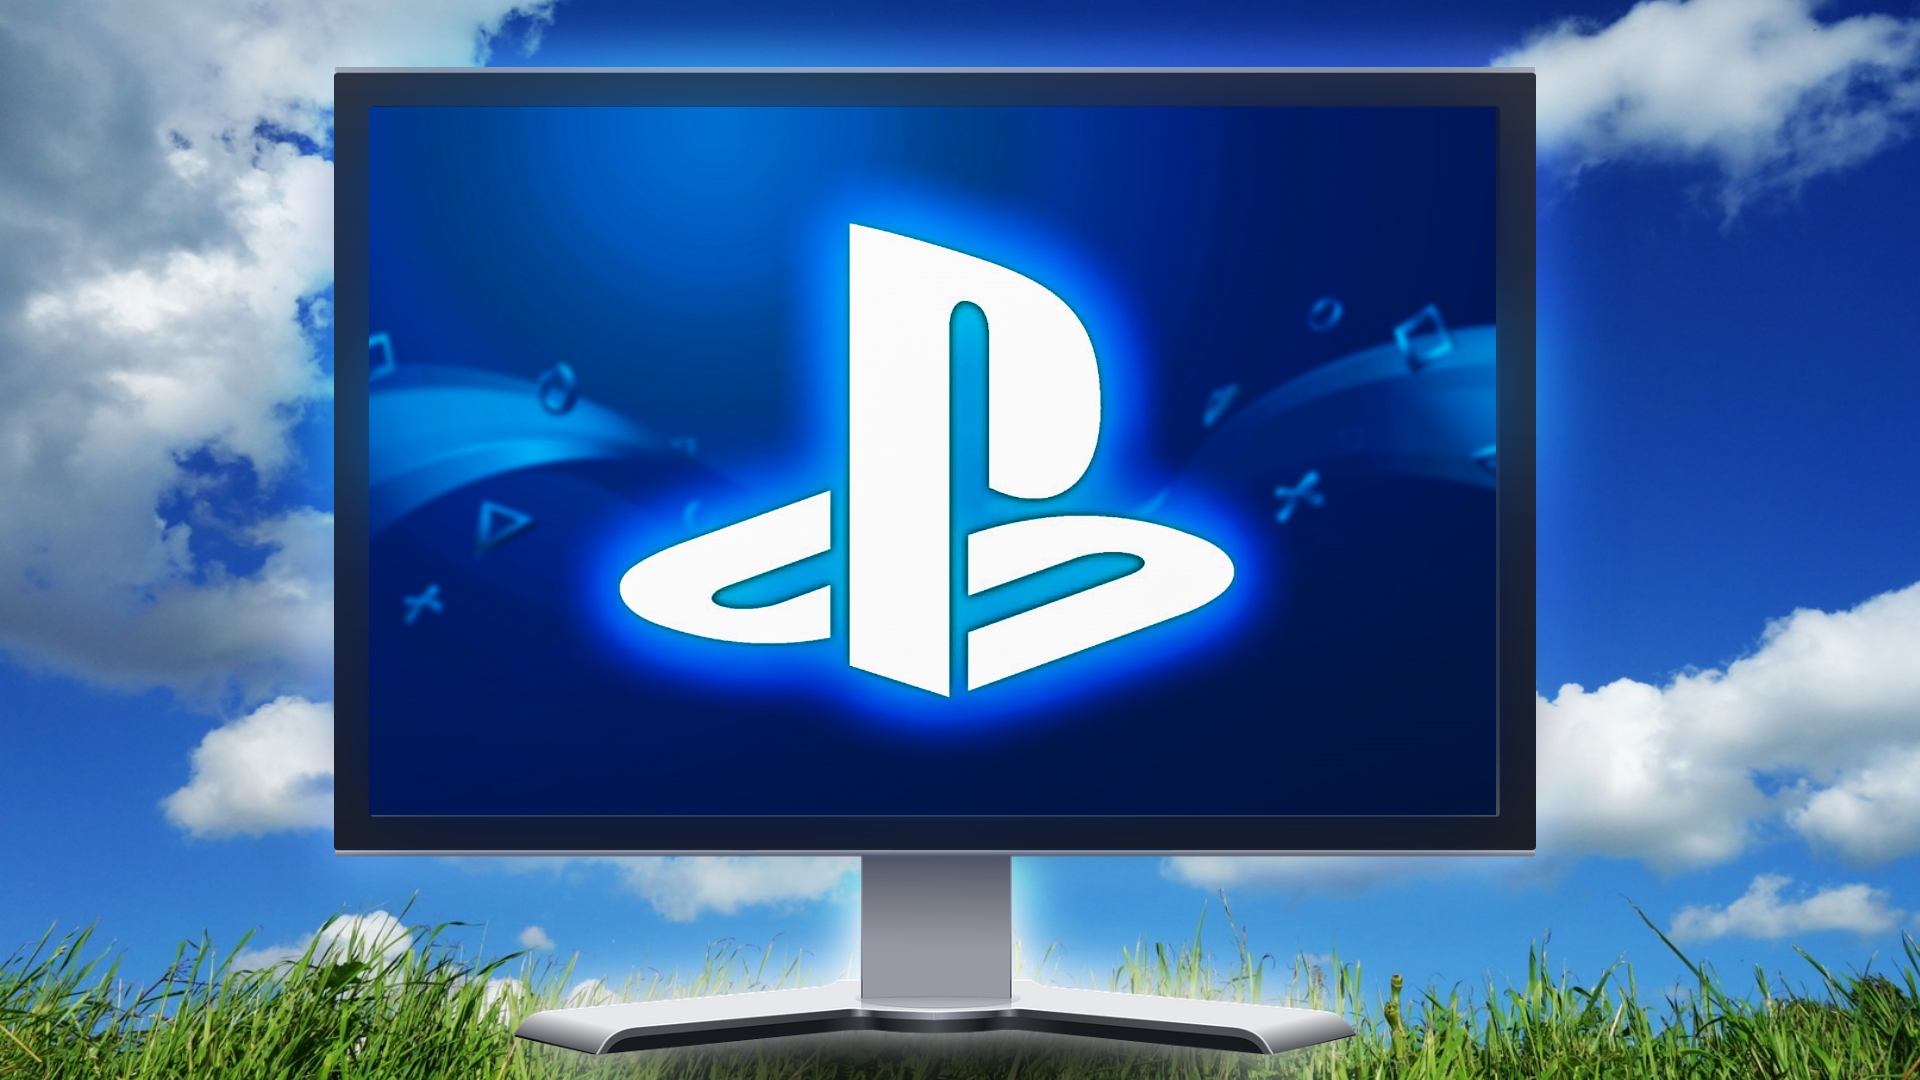 Thoughts on PS Plus PC Cloud Streaming? : r/PlayStationPlus